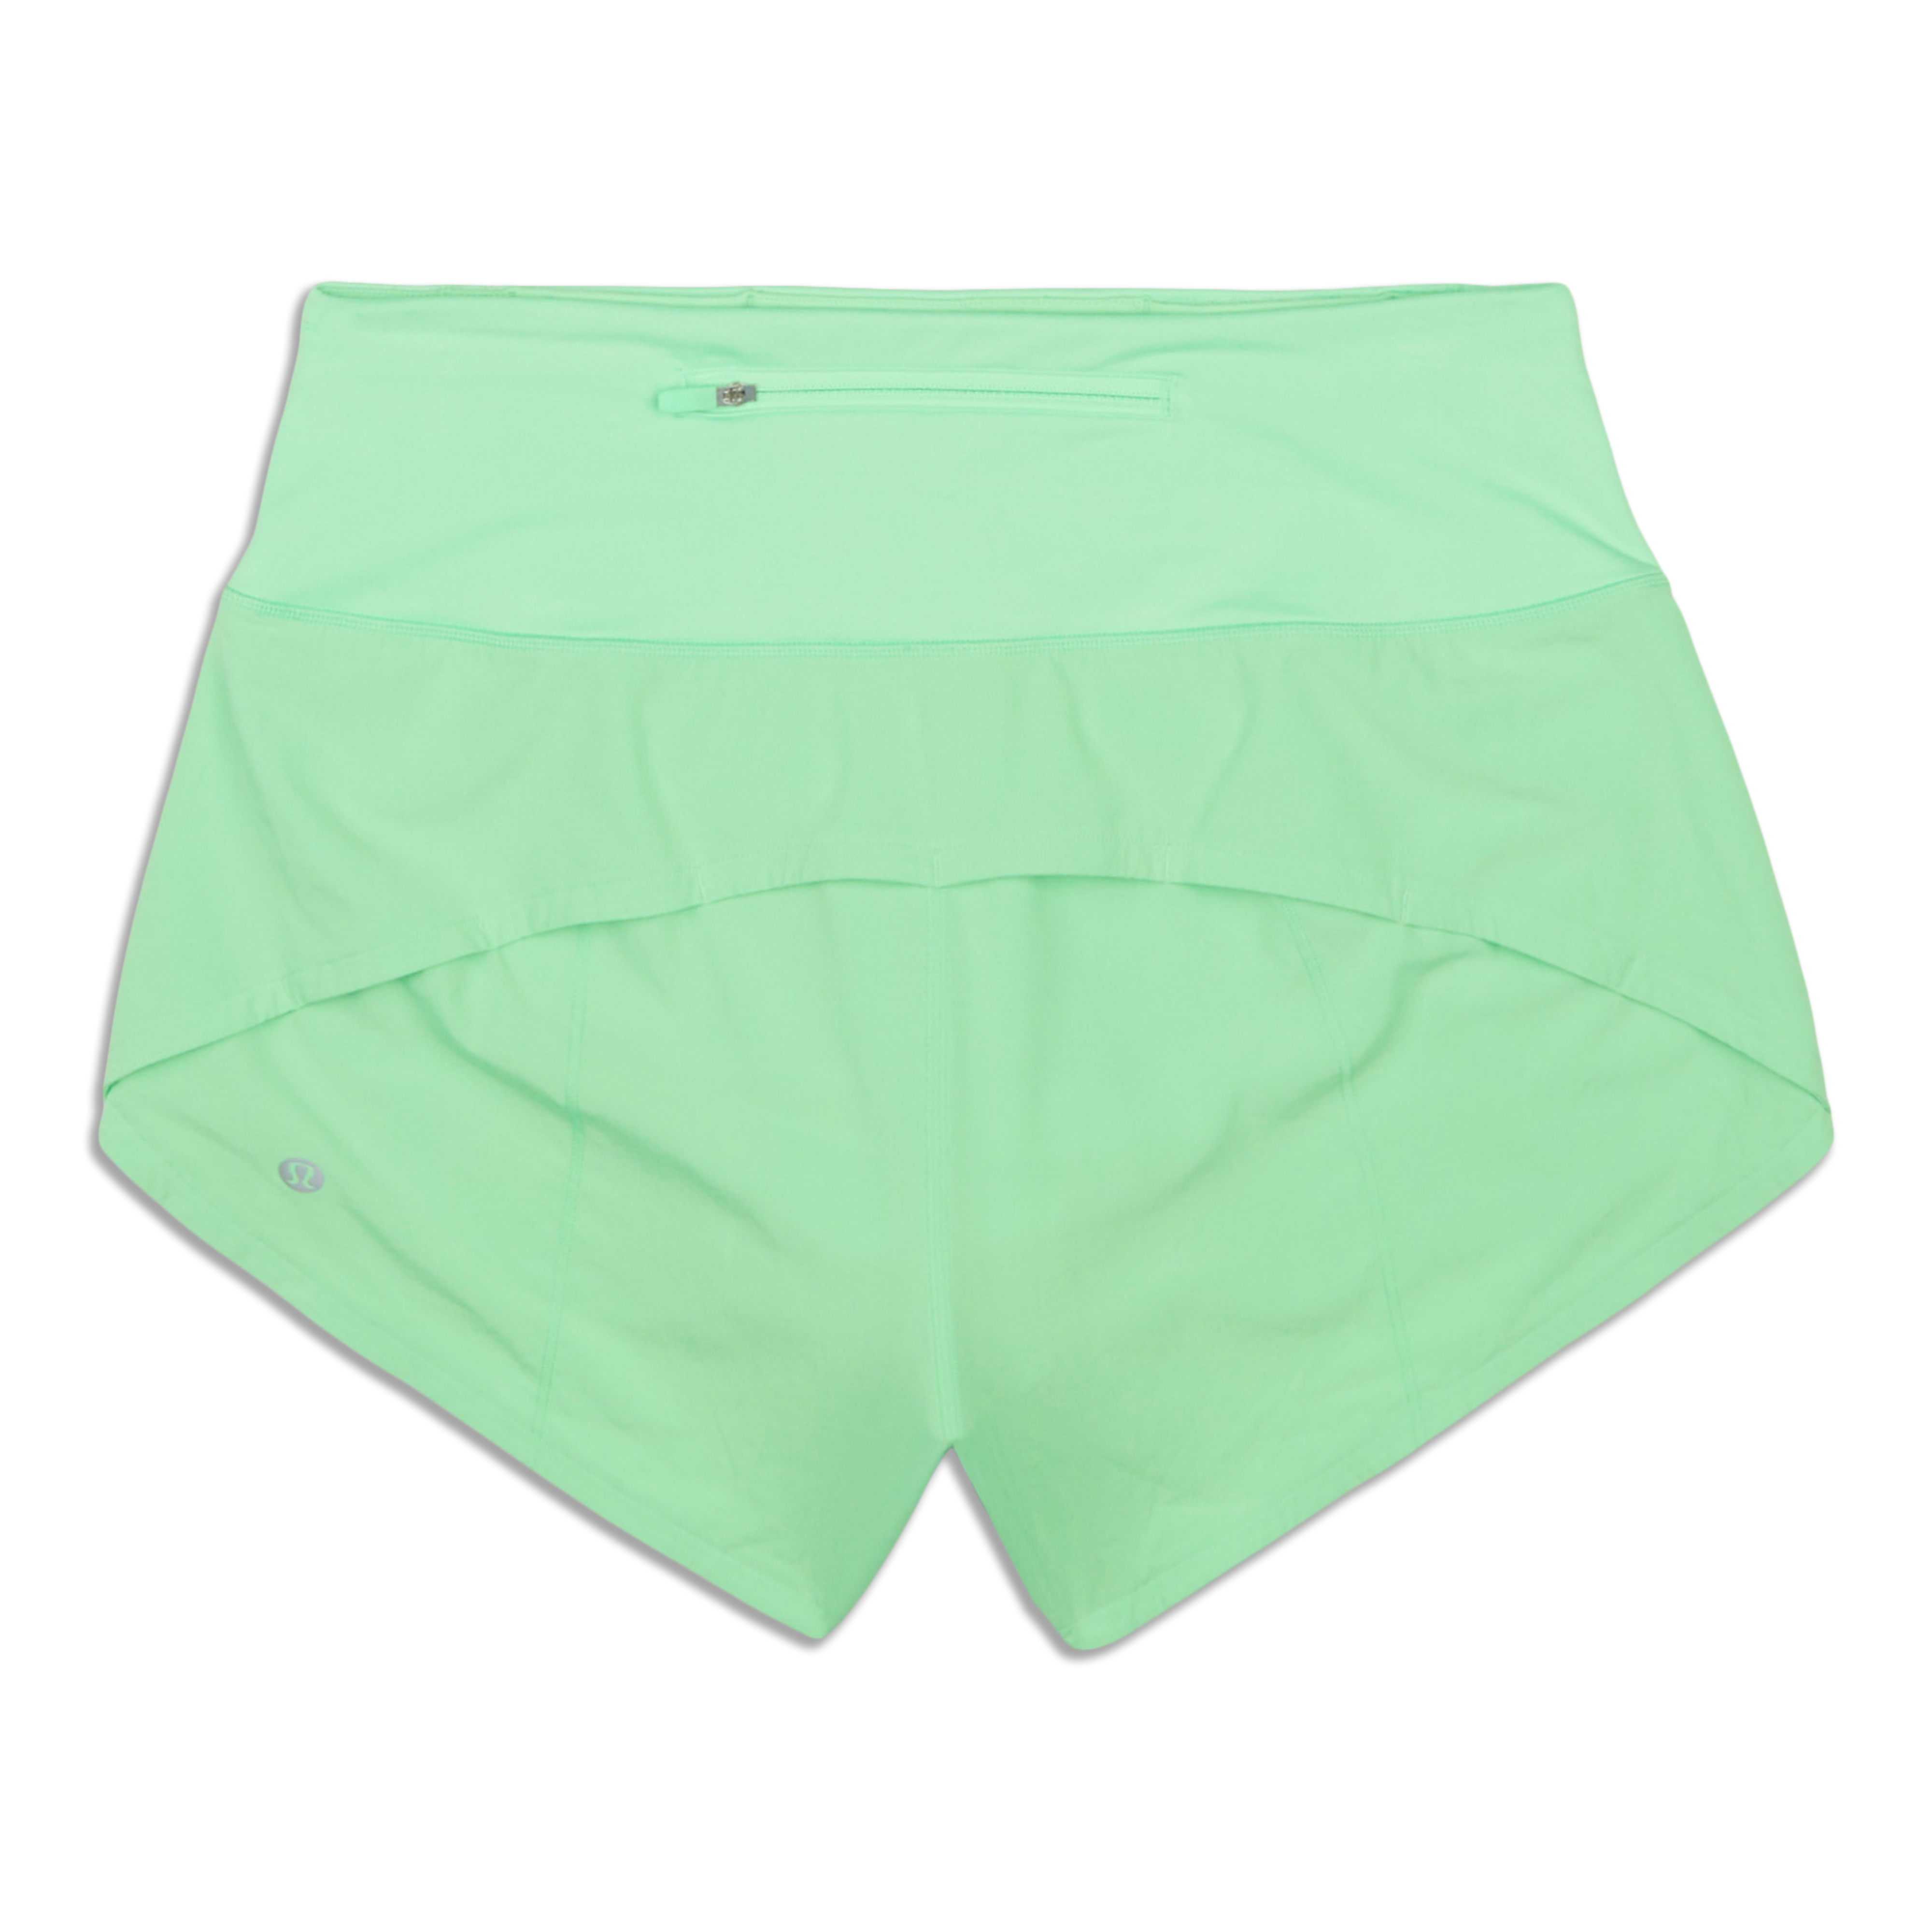 Lululemon Speed Up High-Rise Shorts, Size 2 Tall, Mint Coloured